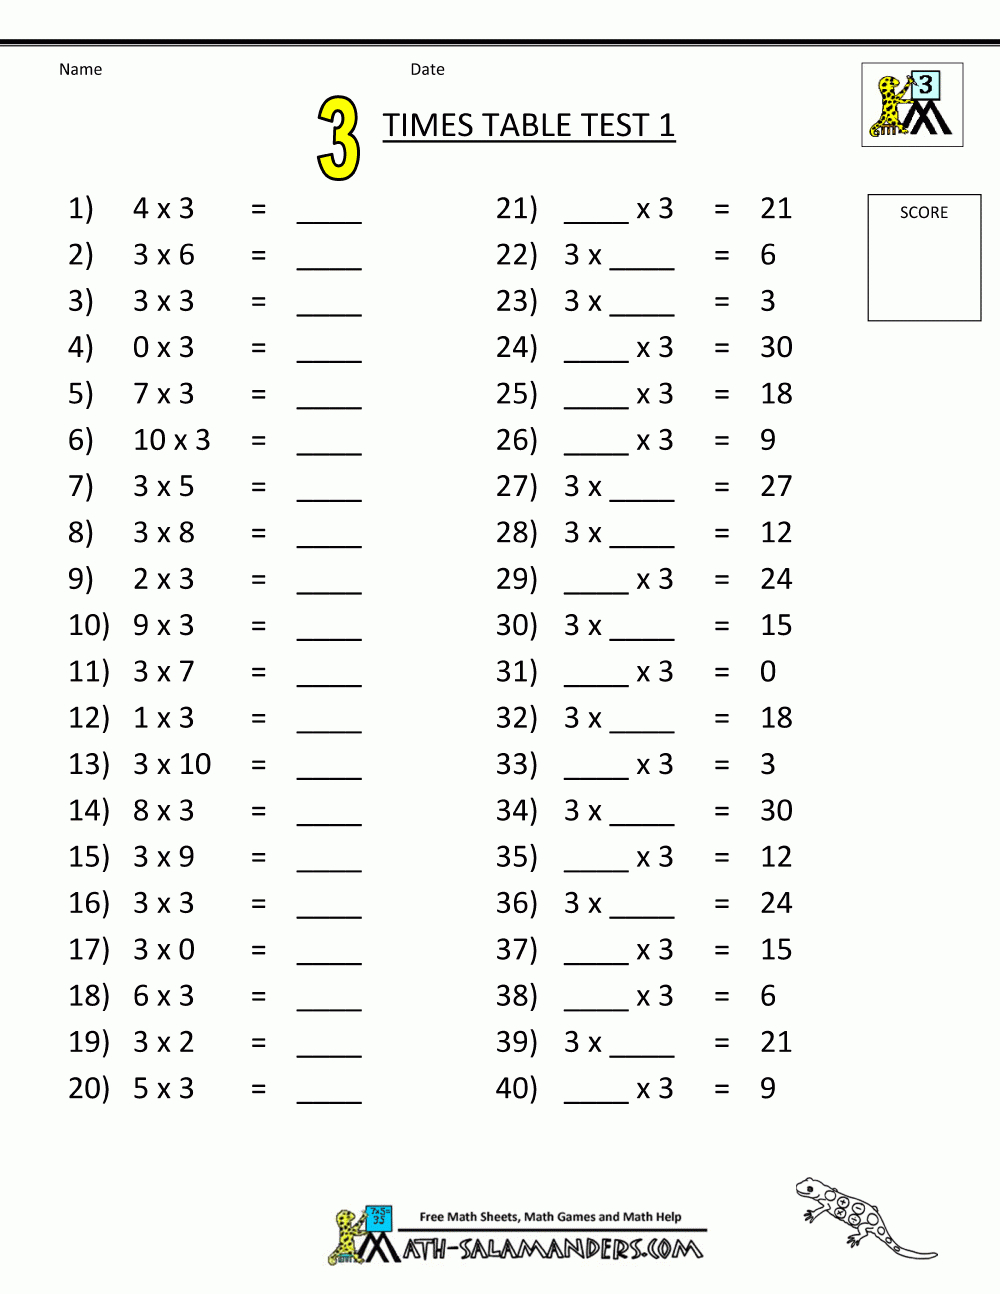 Times Table Tests - 2 3 4 5 10 Times Tables for Printable Multiplication Test